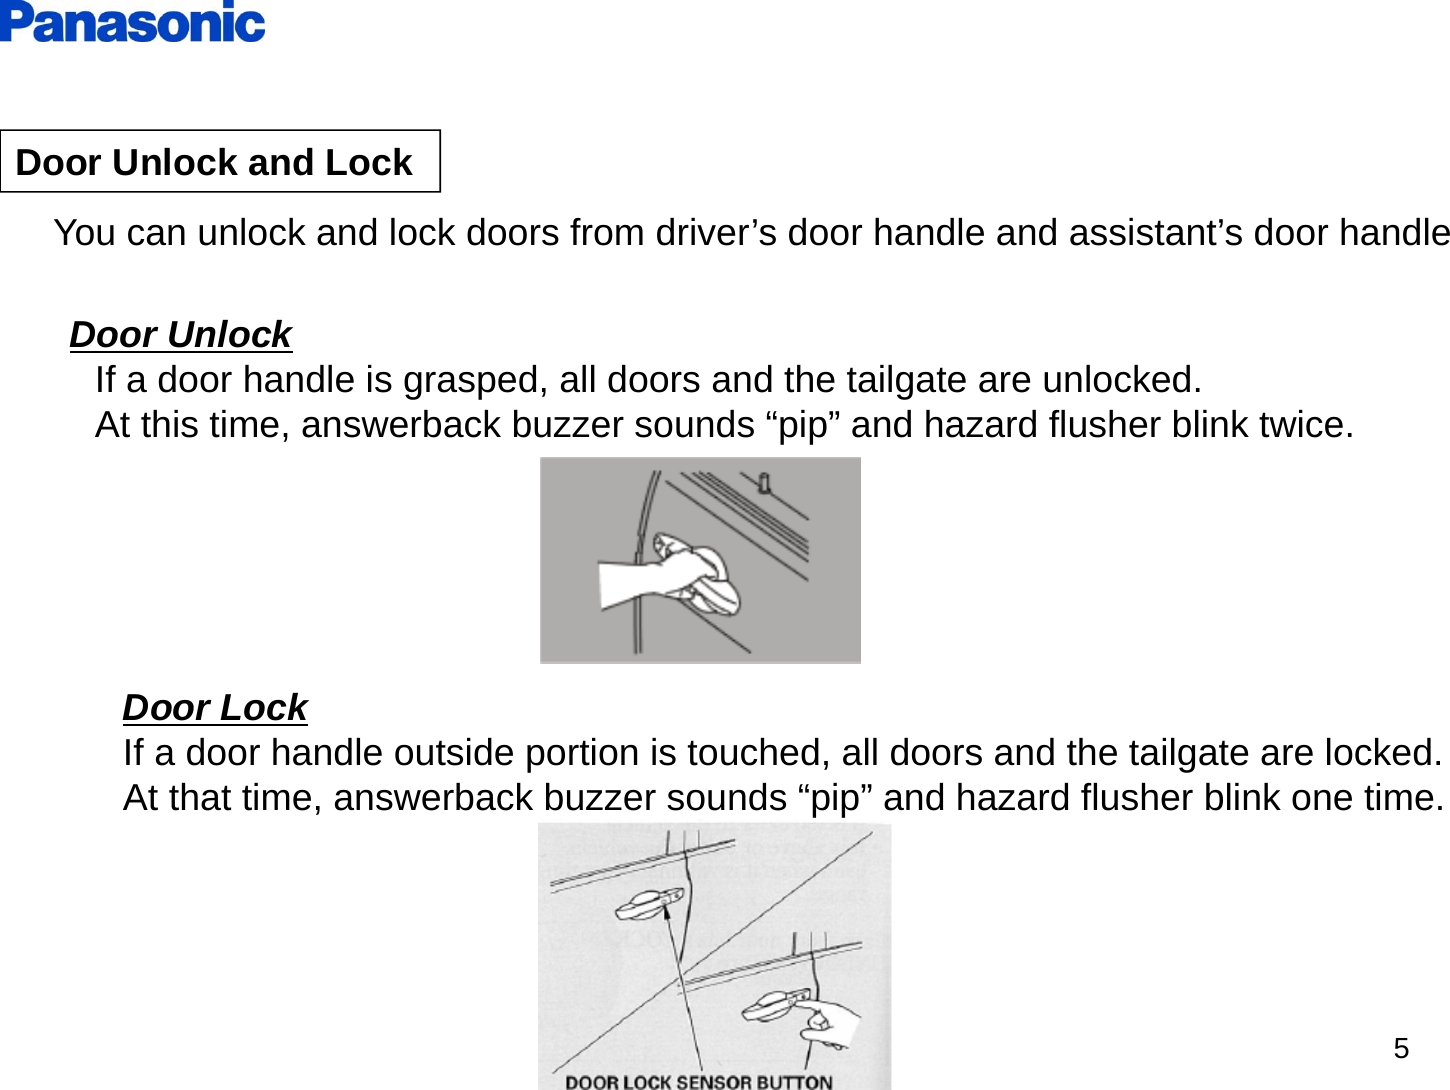 5Door Unlock and LockYou can unlock and lock doors from driver’s door handle and assistant’s door handle Door UnlockIf a door handle is grasped, all doors and the tailgate are unlocked.At this time, answerback buzzer sounds “pip” and hazard flusher blink twice.Door LockIf a door handle outside portion is touched, all doors and the tailgate are locked.At that time, answerback buzzer sounds “pip” and hazard flusher blink one time.